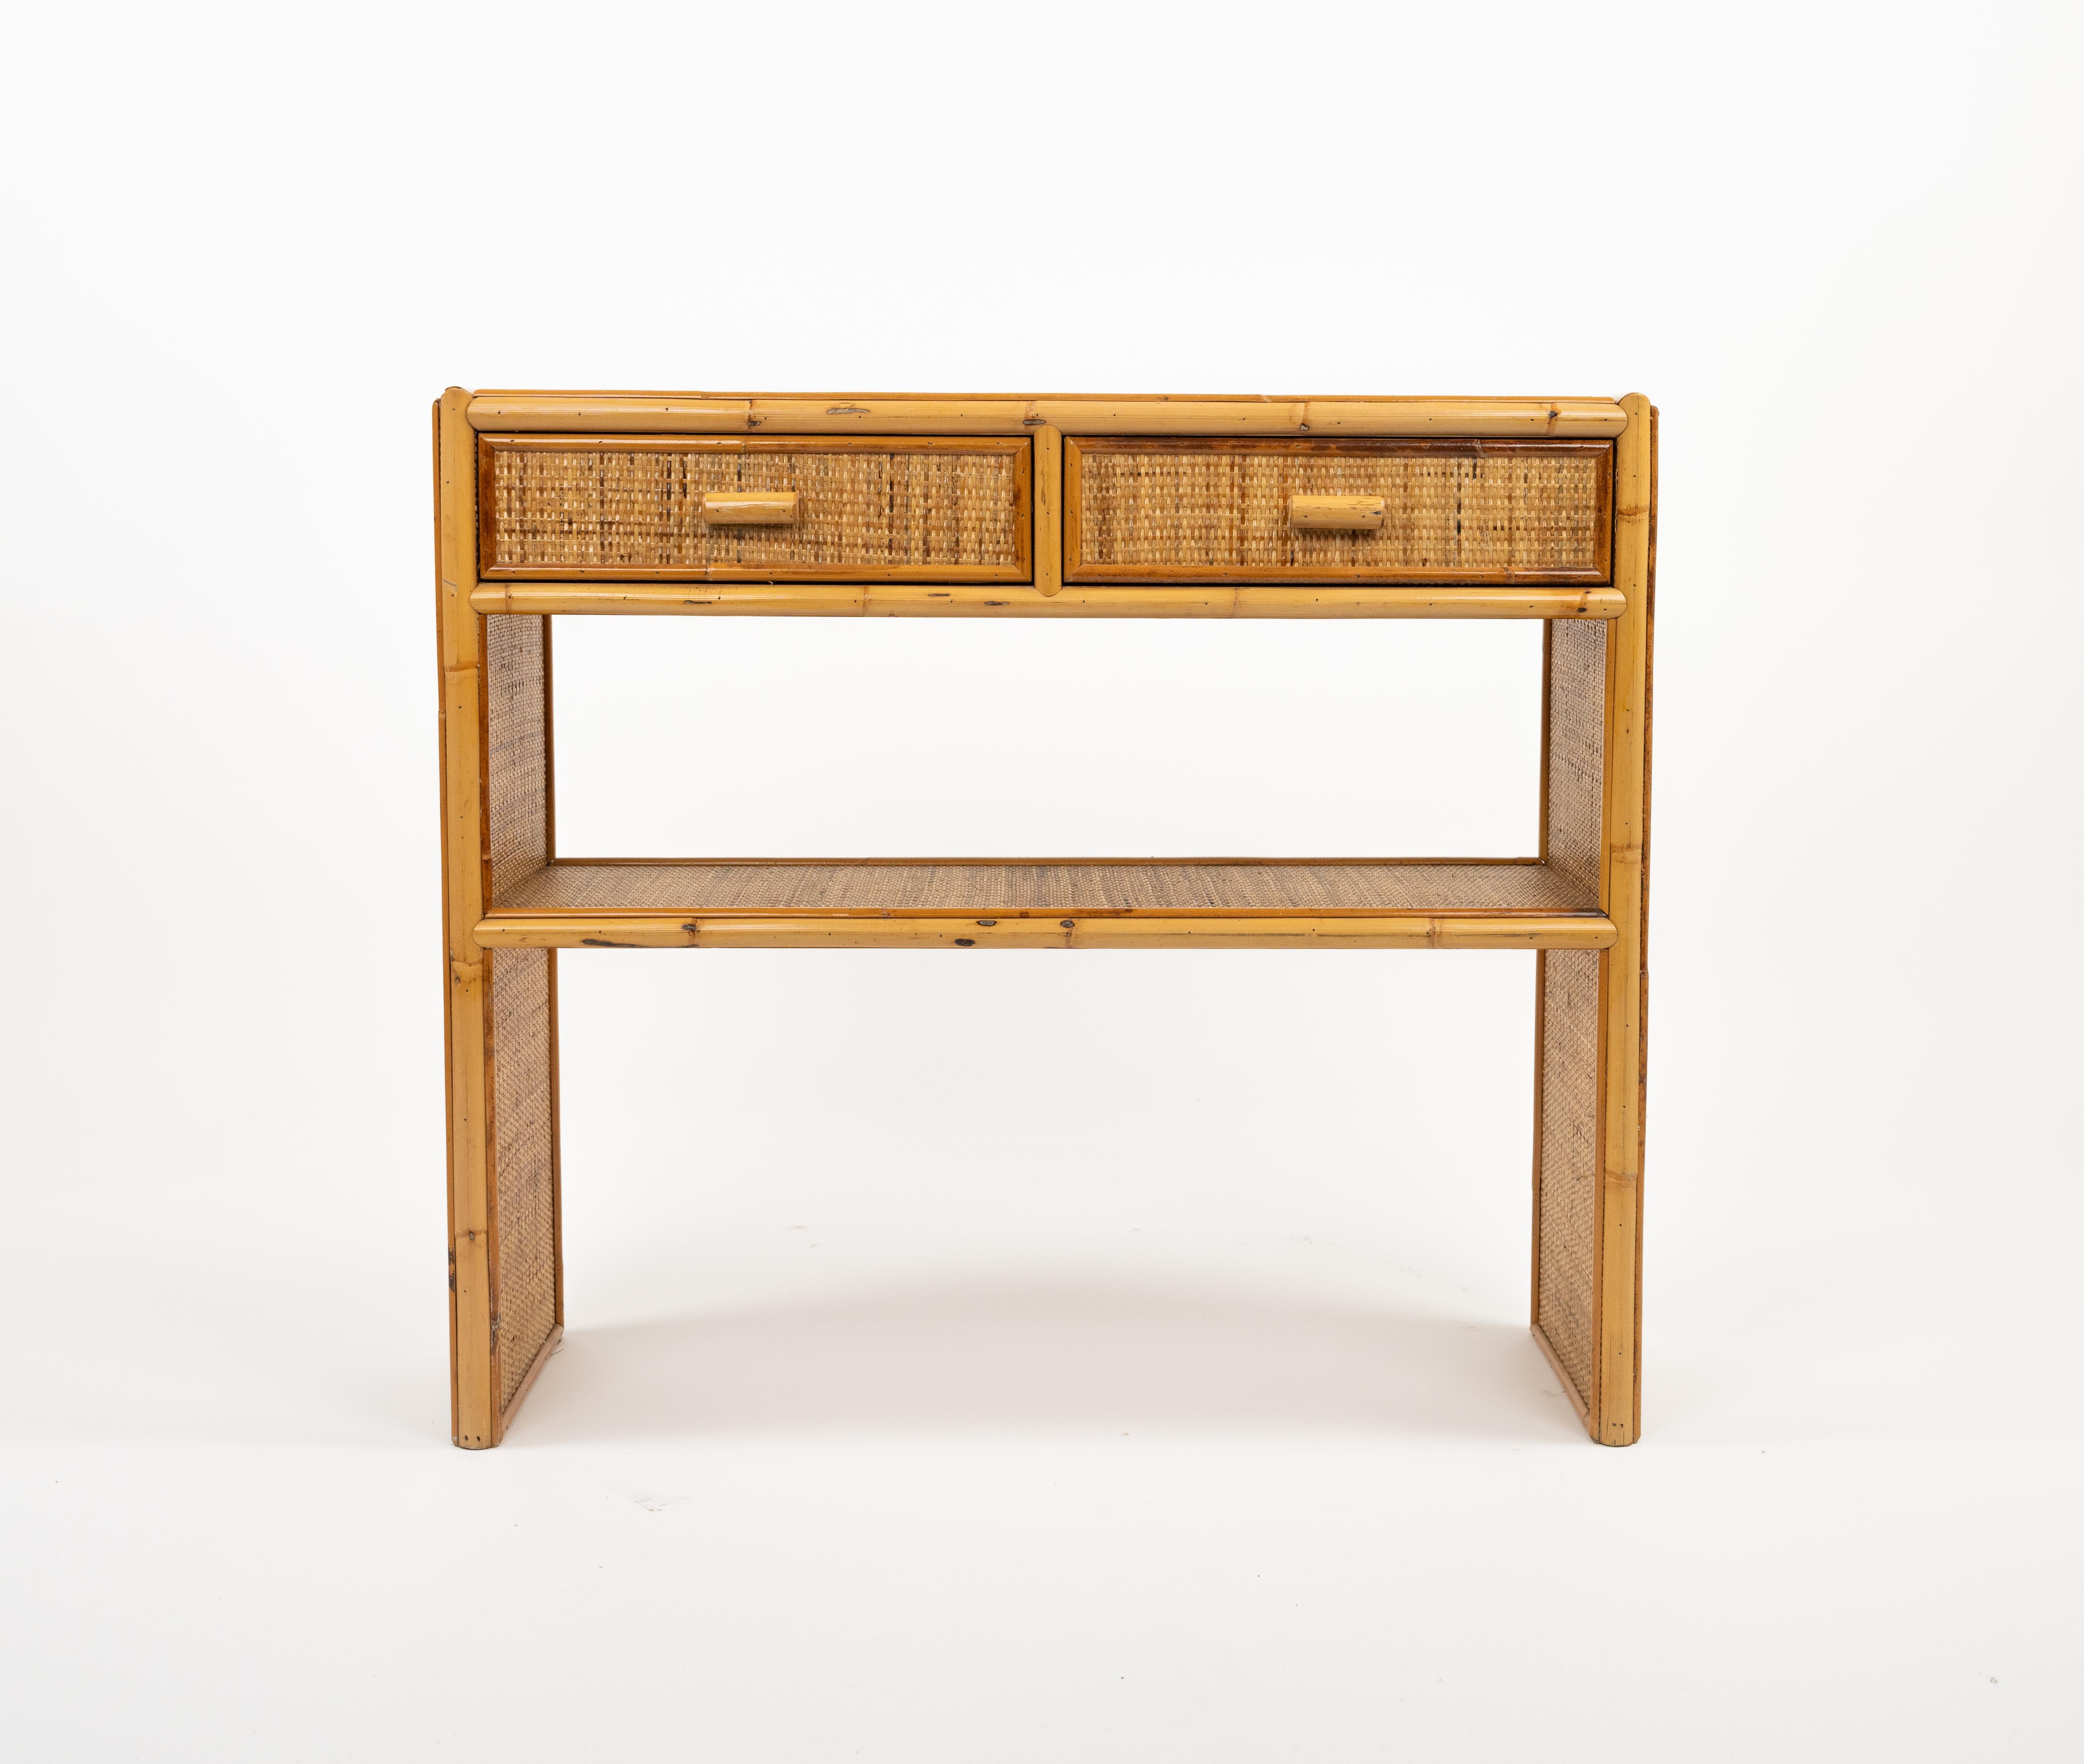 Midcentury Bamboo and Rattan Console Table with Drawers, Italy 1970s For Sale 3